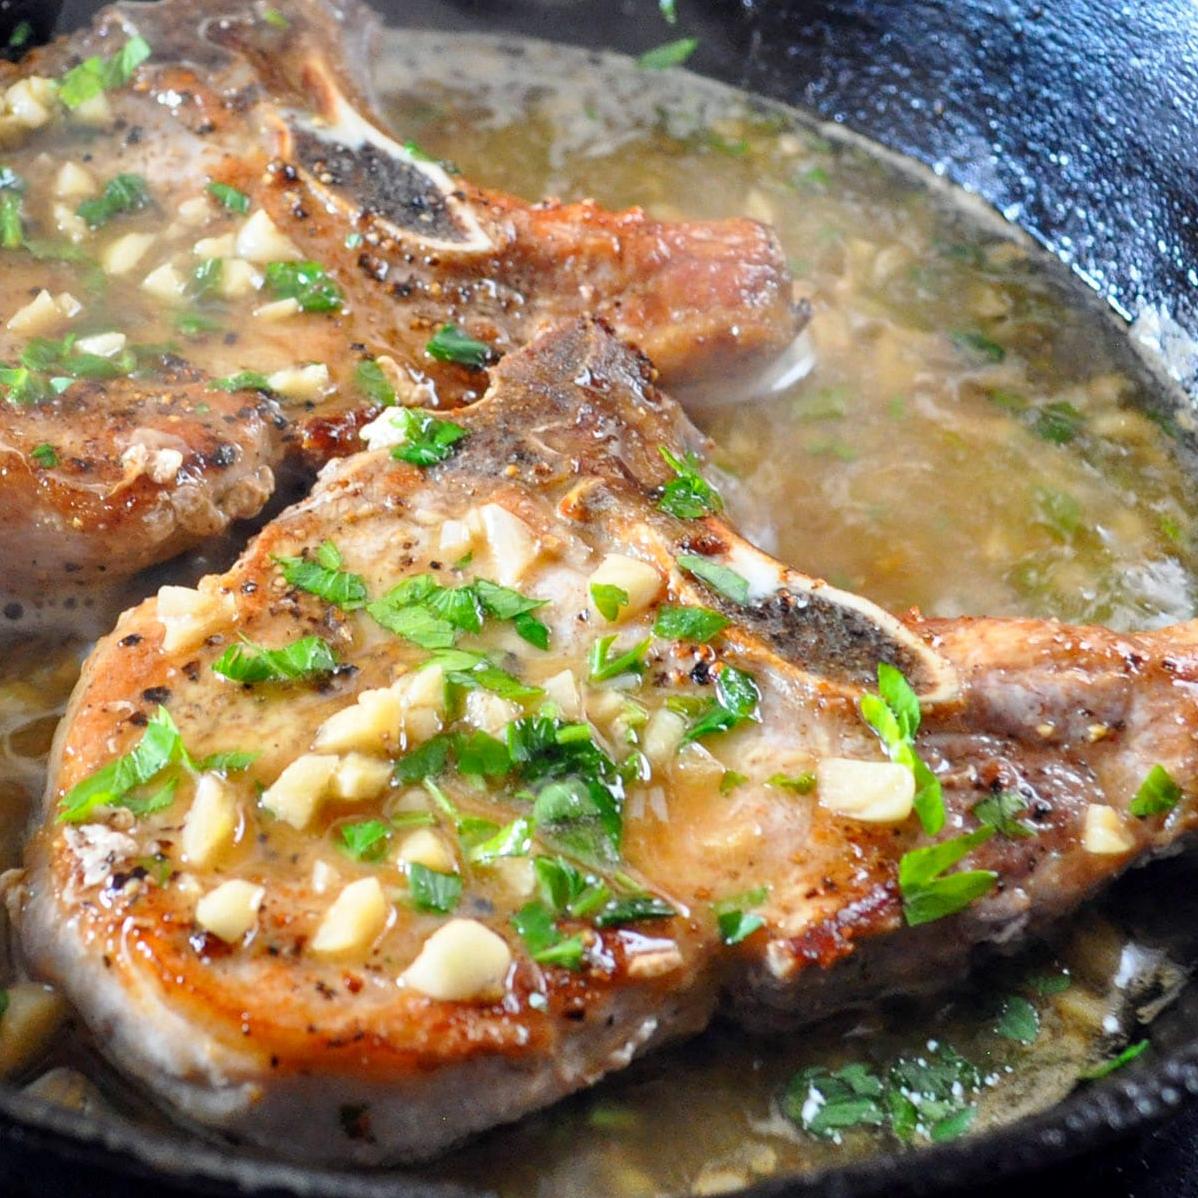  Tender pork chops cooked to perfection with white wine.